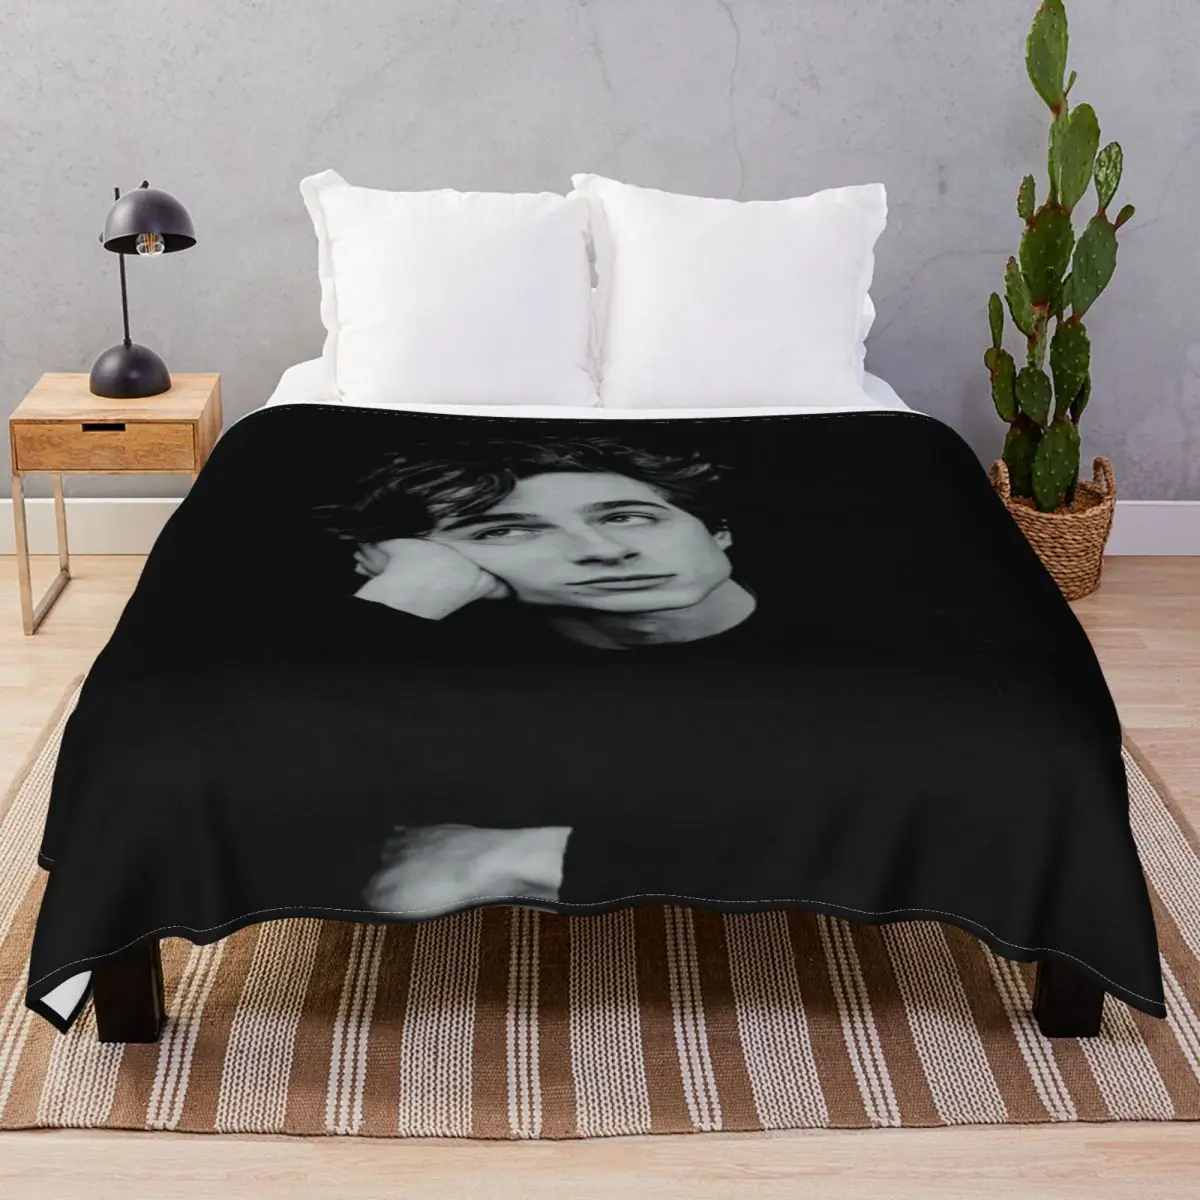 Timothee Chalamet Design Blankets Flannel Textile Decor Multi-function Unisex Throw Blanket for Bedding Home Couch Camp Office